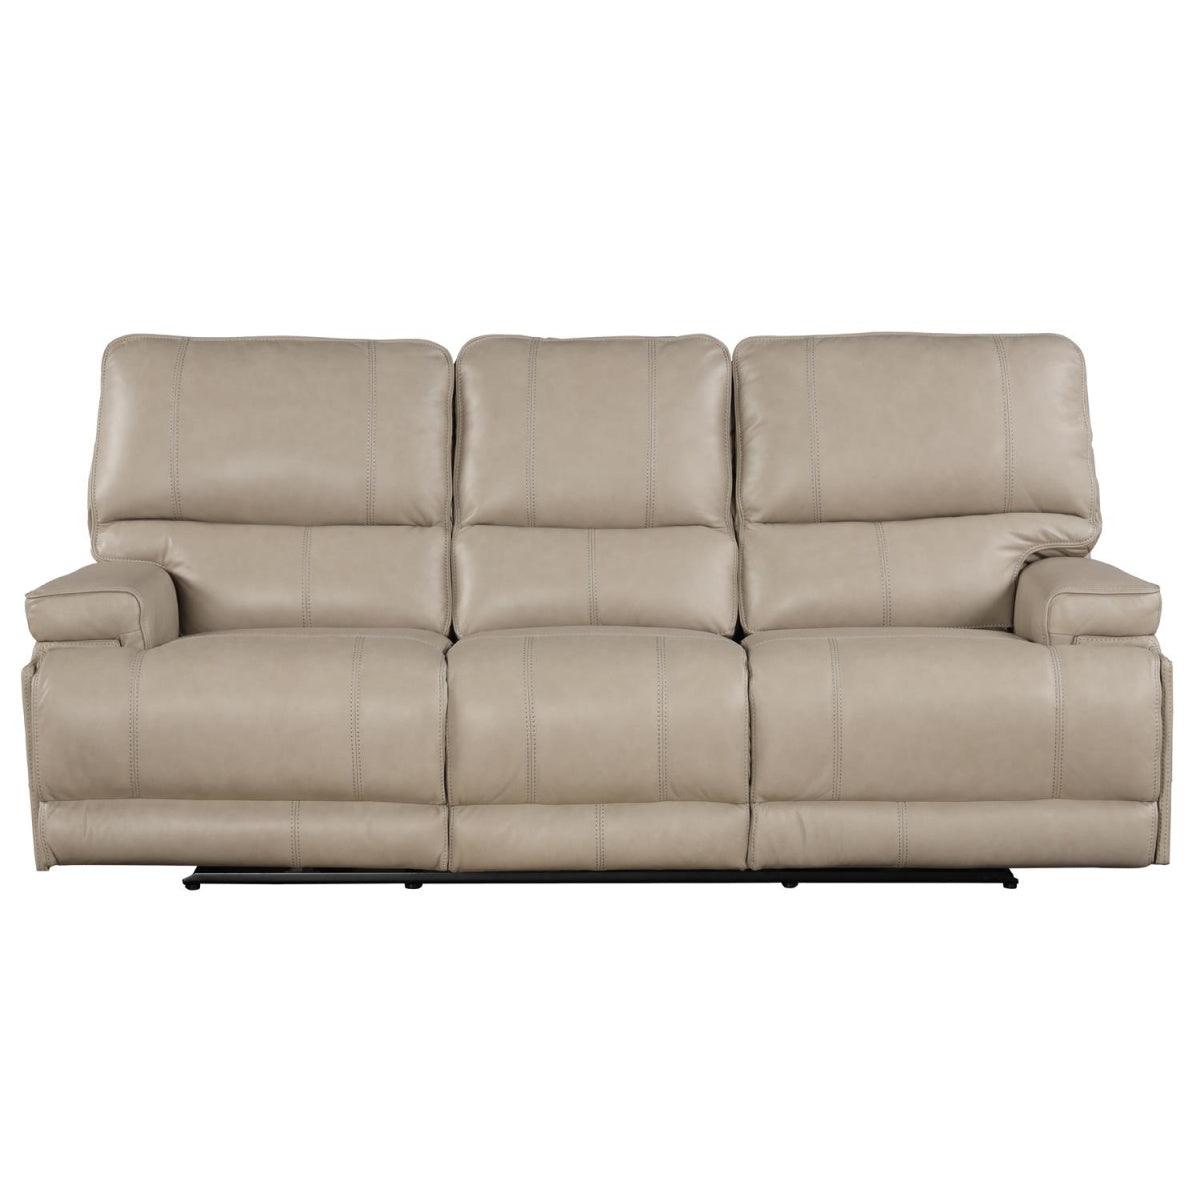 Pebble Beach Reclining Collection